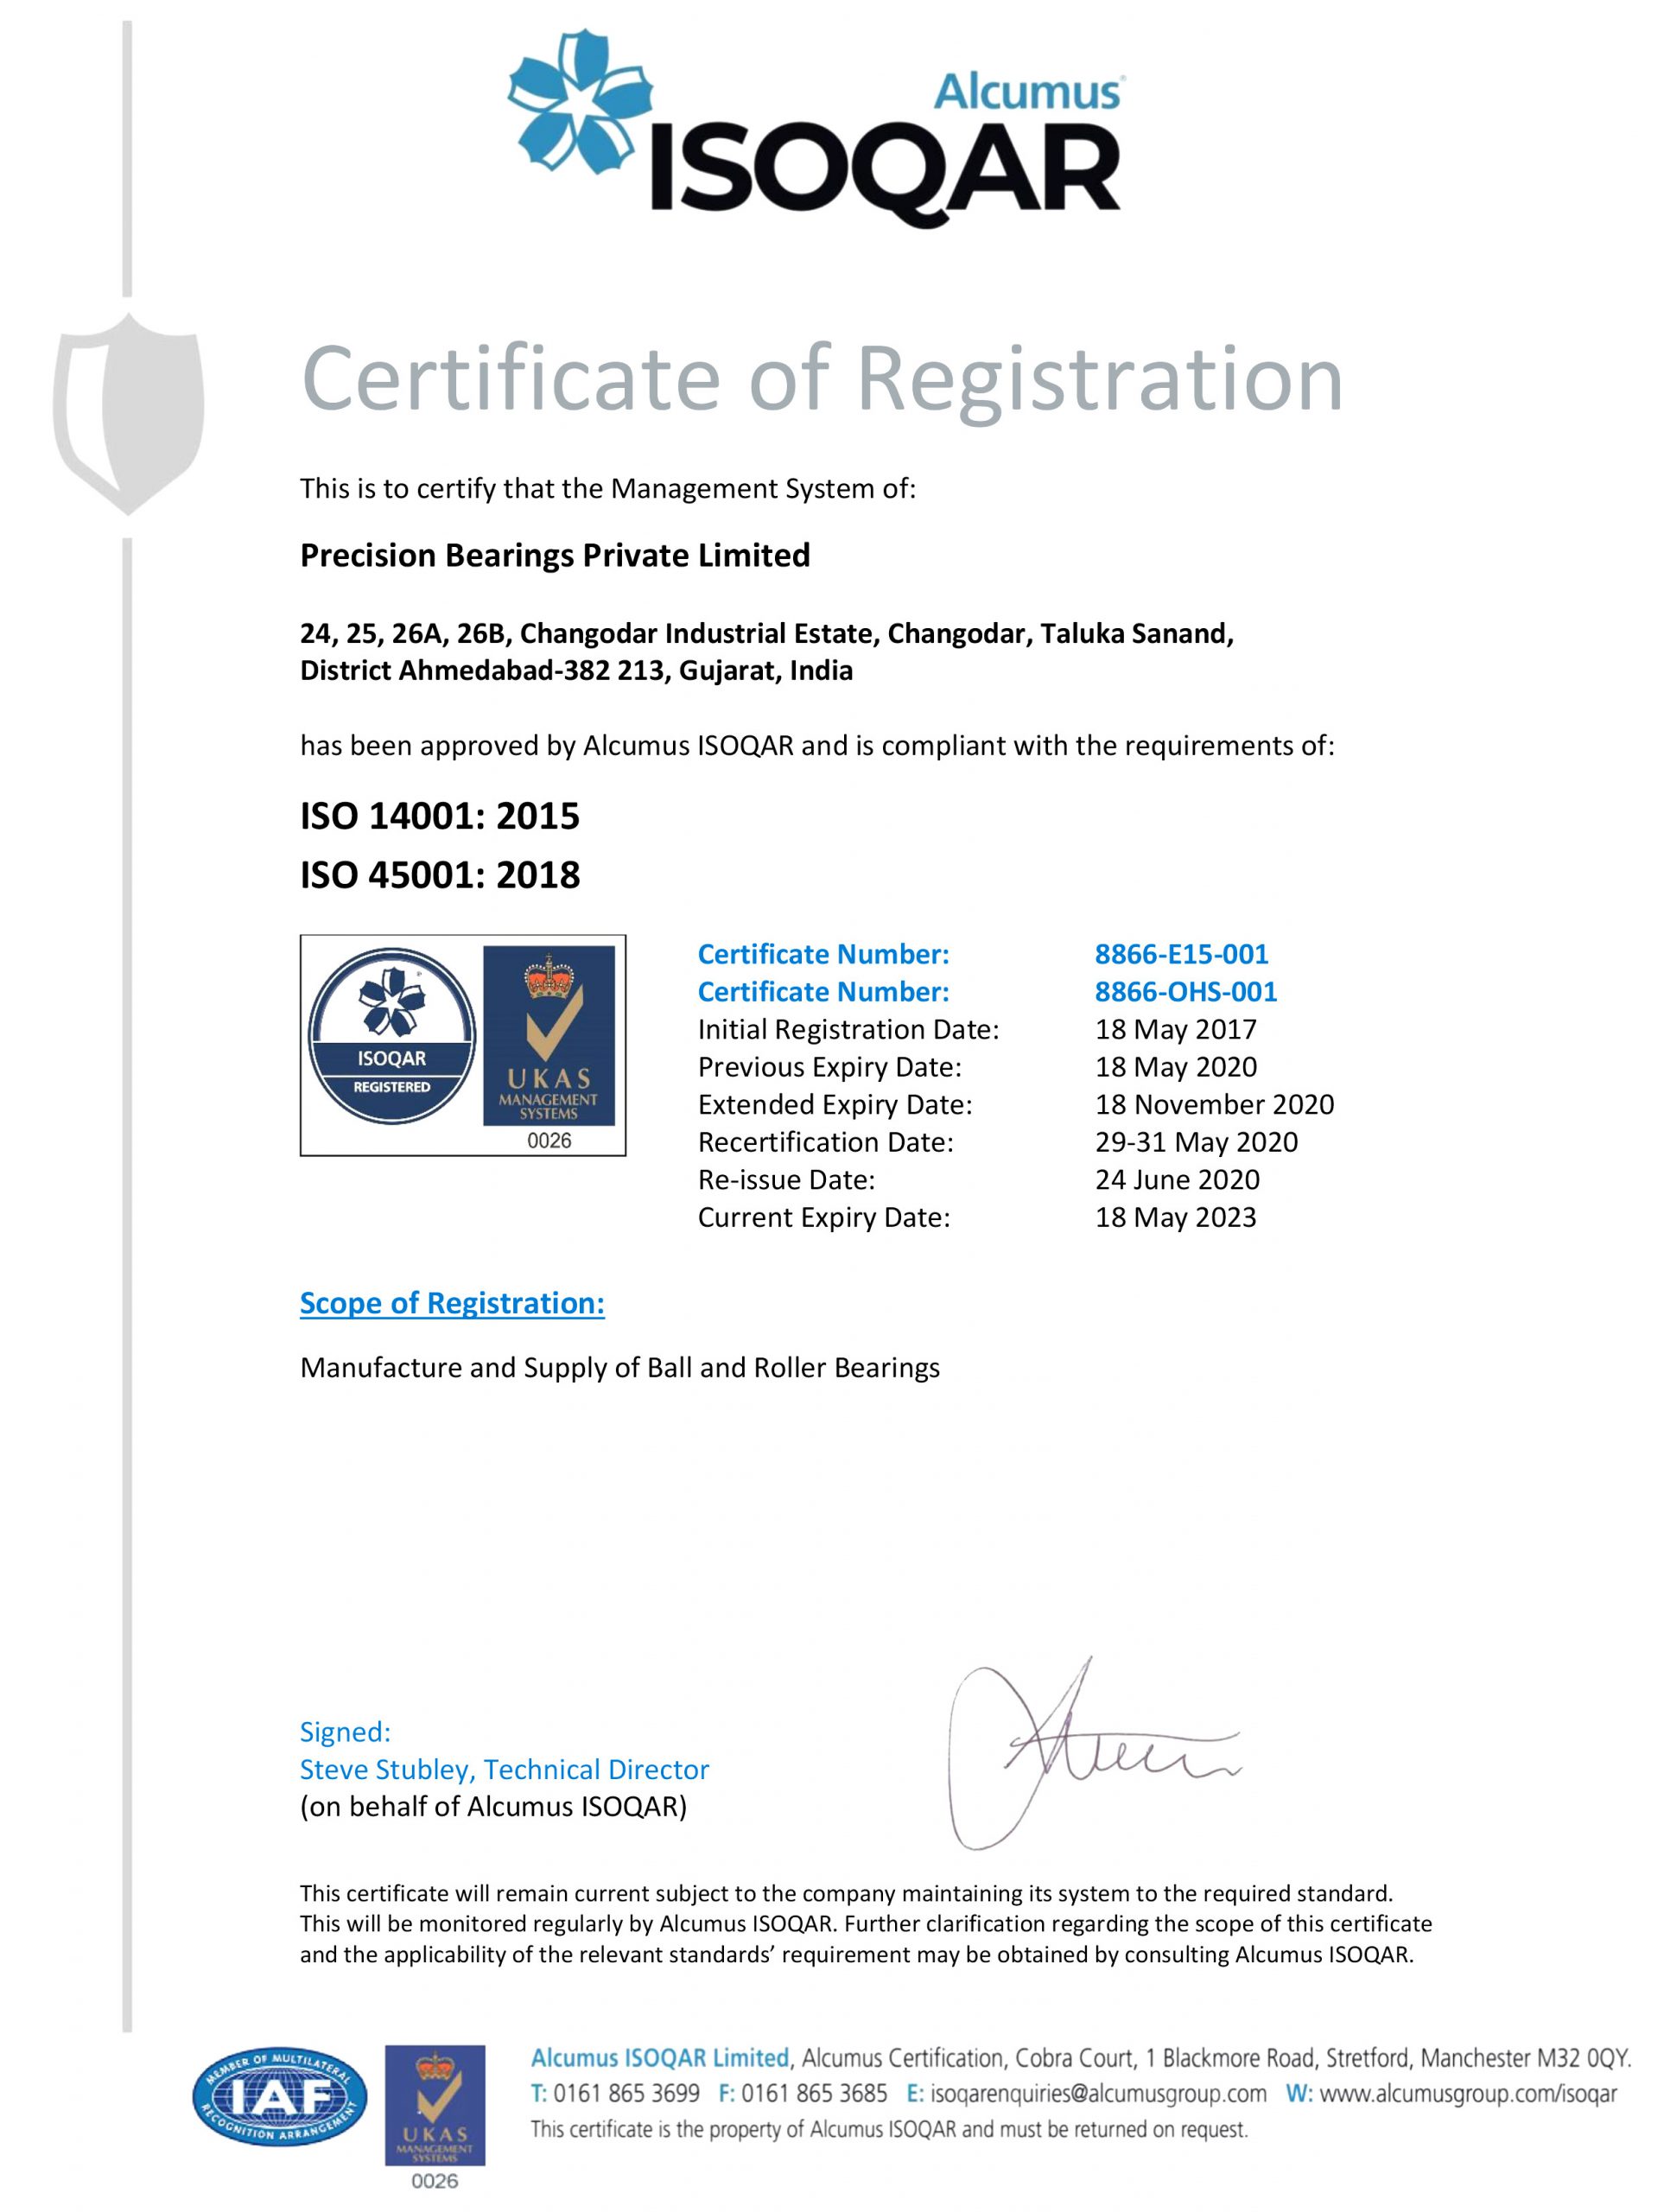 3 ISO 14001 45001 Certificate valid up to 18 MAY 2023 scaled